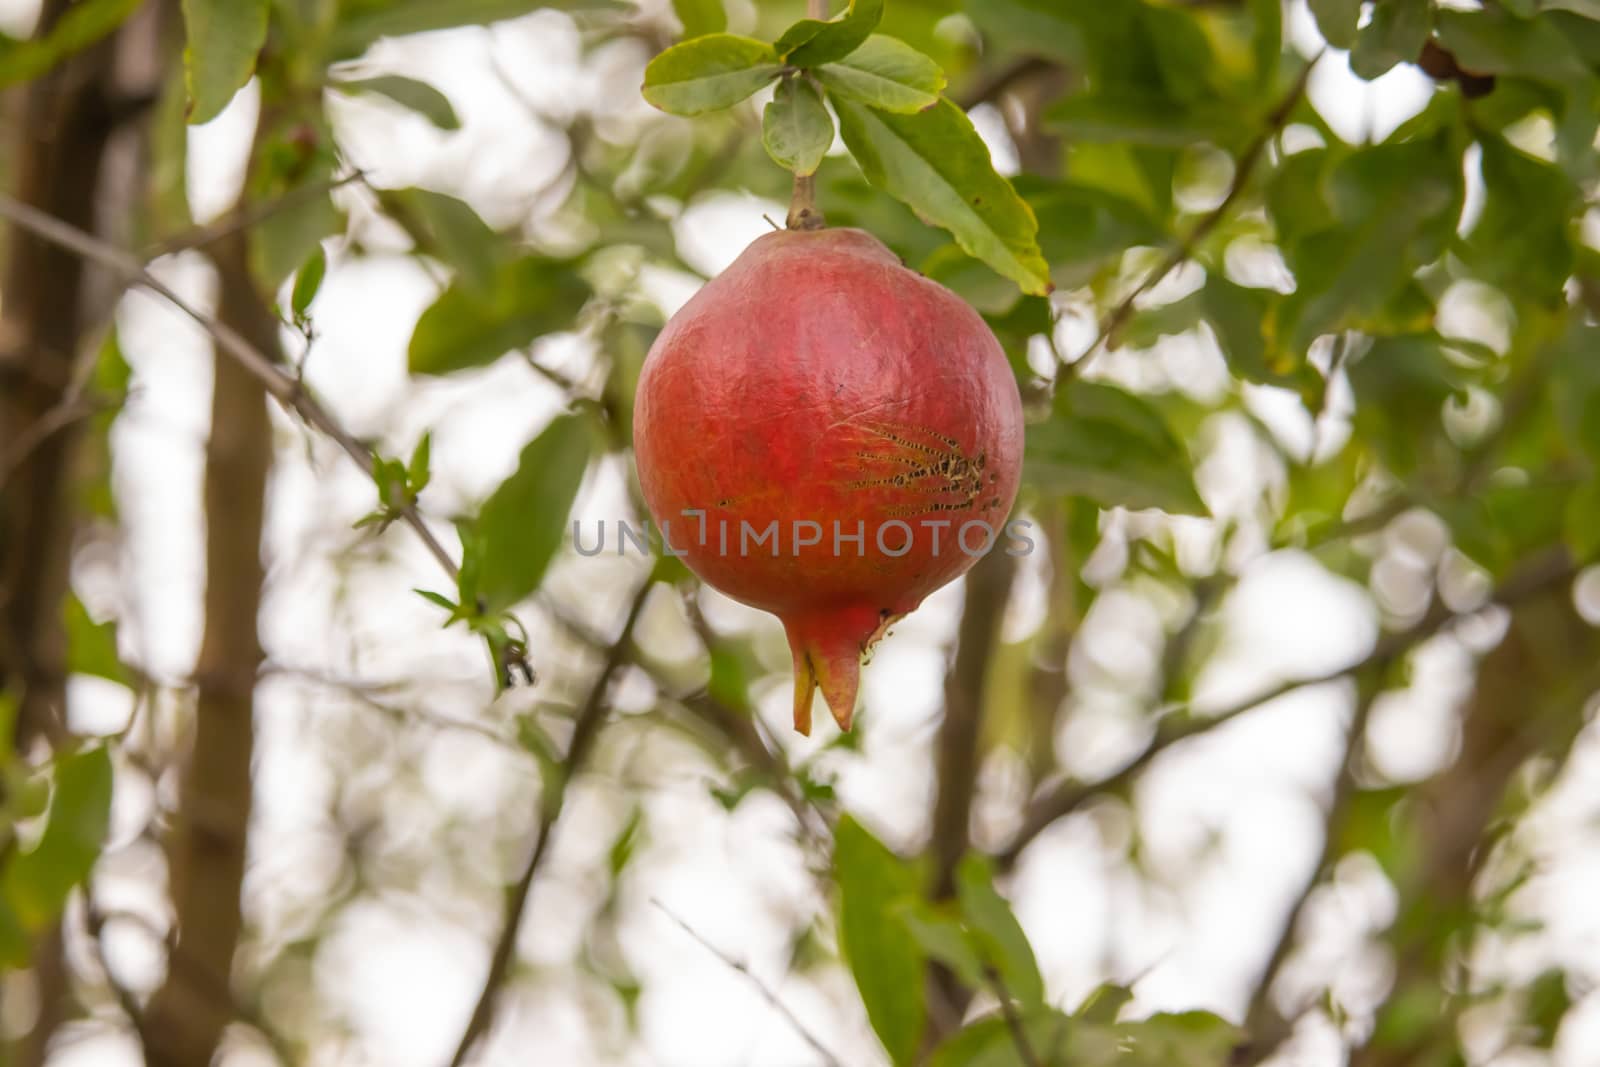 A ripe bright red pomegranate hanging on the tree, This photo is taken from the rural area in Rajasthan, India.